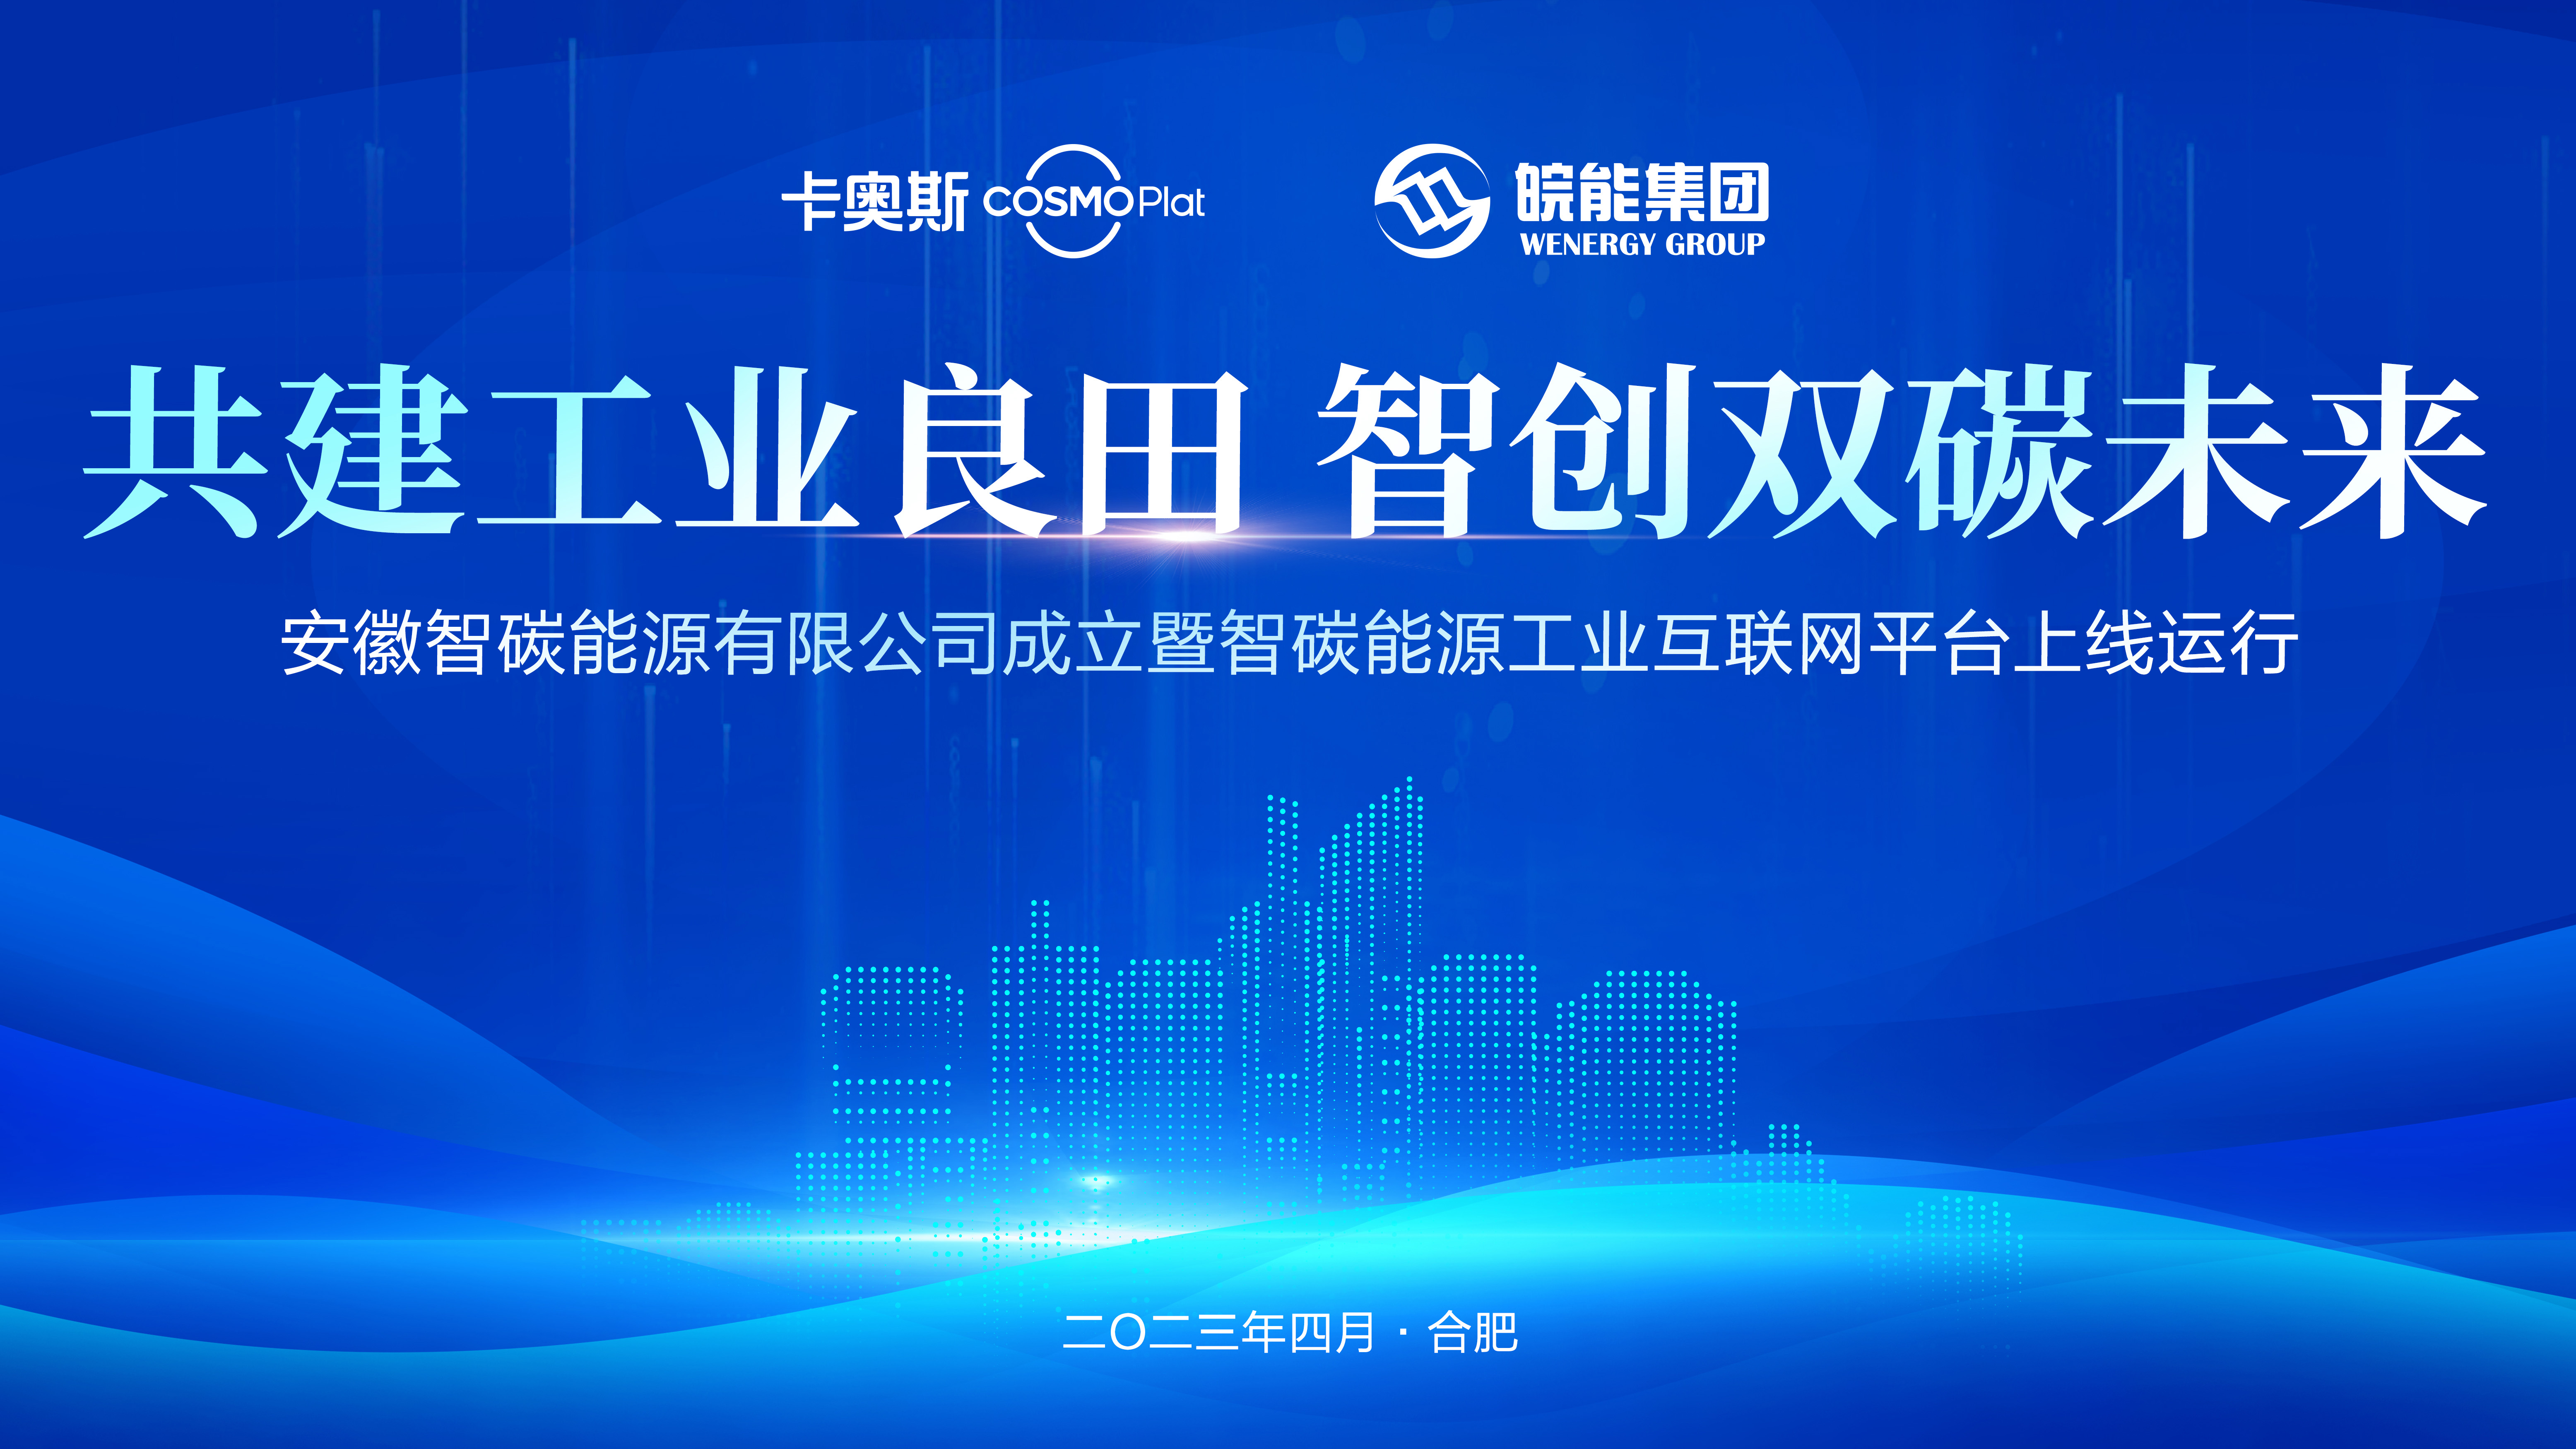 Anhui's first park's energy industry Internet platform is launched. Anhui Energy Group and Haierkobos will create a 